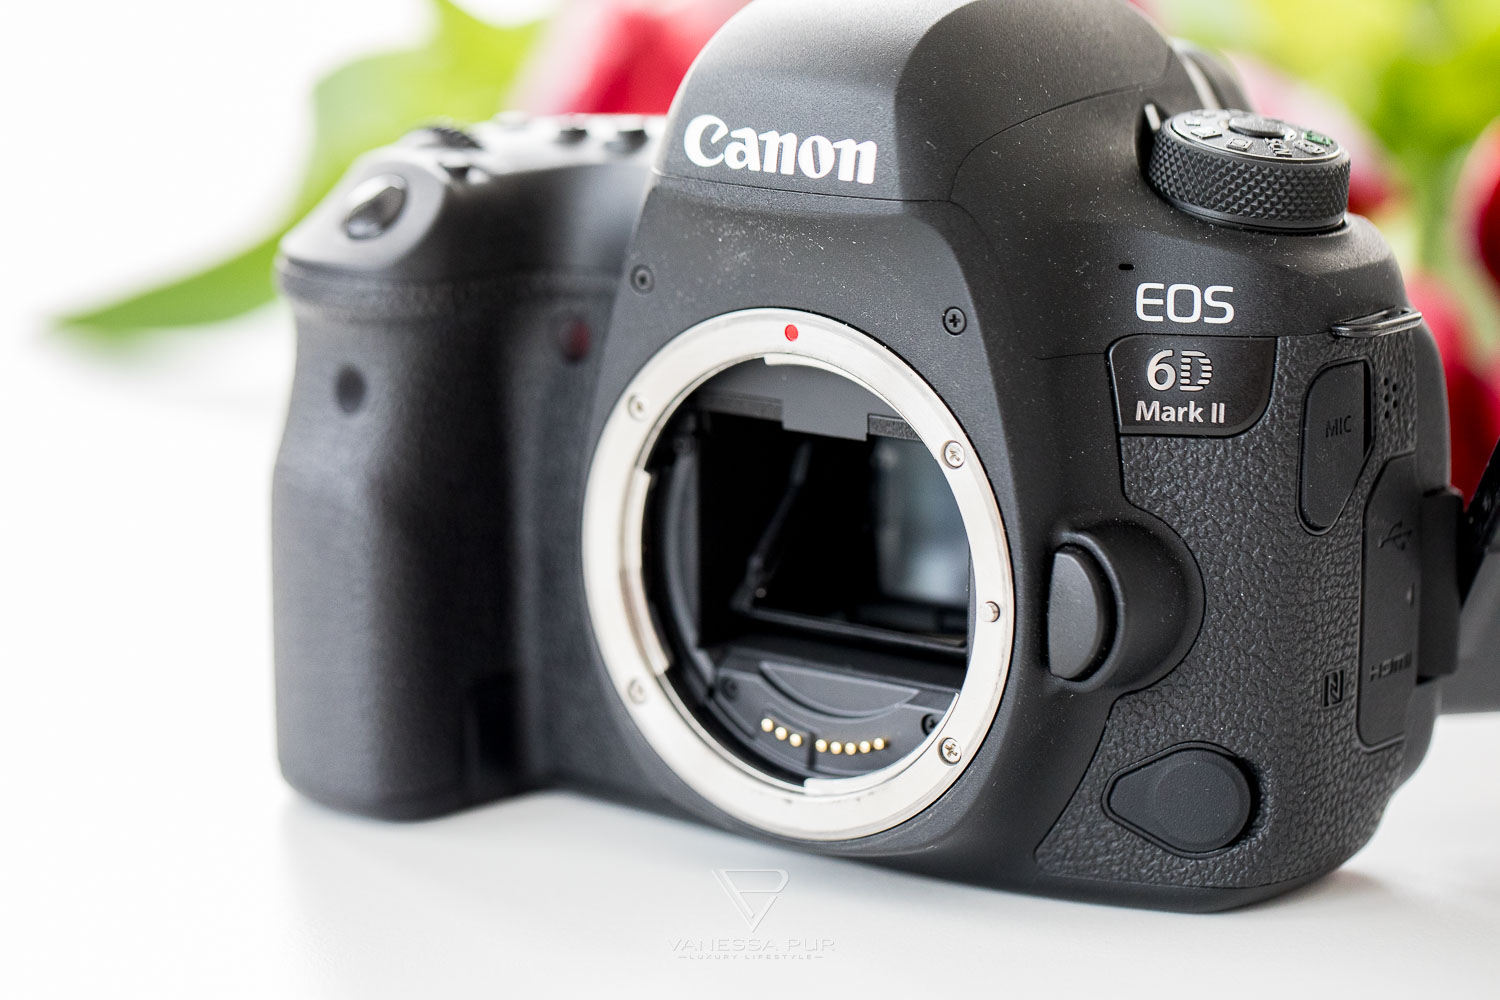 Canon 6D Mark II in long-term test - camera for photographers and videographers - How good is Canon's full-frame camera for photographers, vloggers and YouTubers? Is the switch worth it? What alternatives are there?